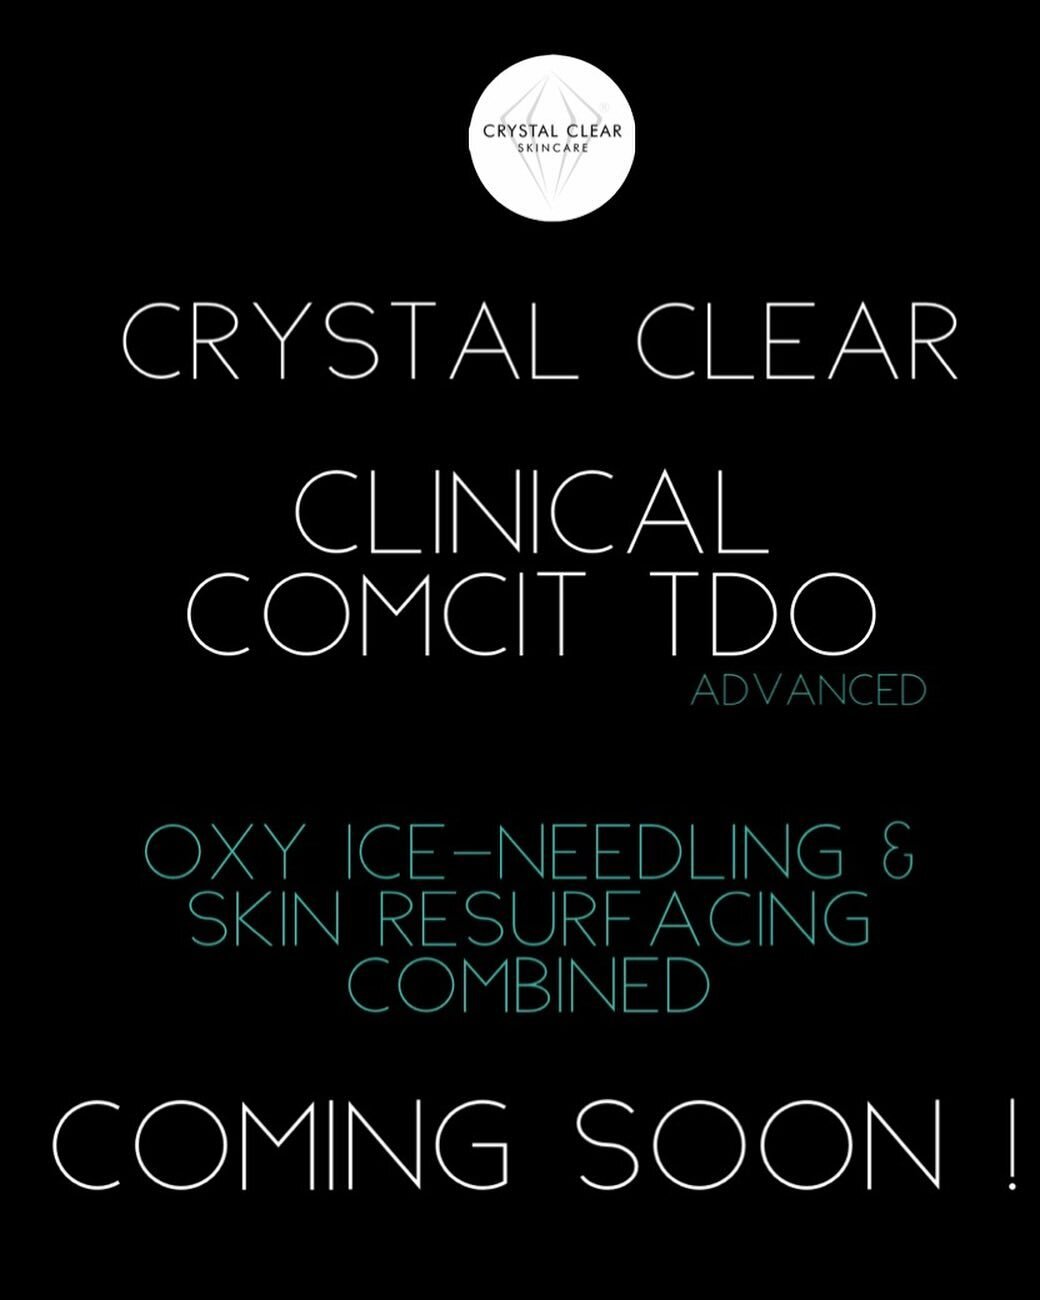 ✨COMING SOON..! Our two favourite treatments combined into one ☝️ Keep your eyes peeled for our APRIL OFFER&hellip;✨ #crystalclearskincare #crystalclearcomcit #crystalclearresurfaceandheal #crystalclearclinicalcomcittdo